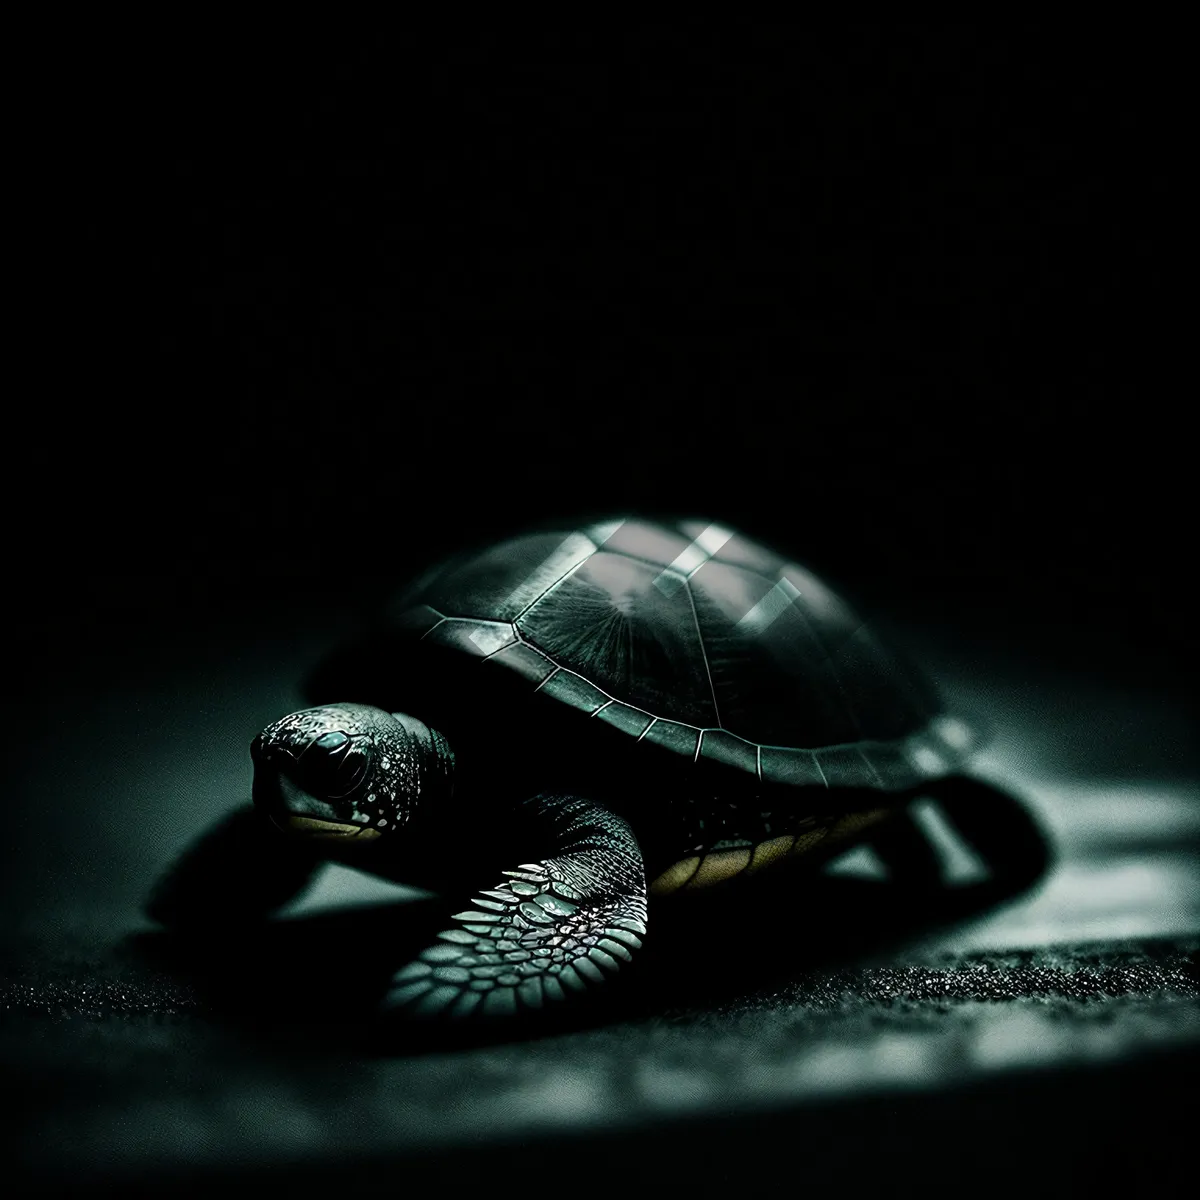 Picture of Slow-moving Reptile with Elegant Shell: The Turtle